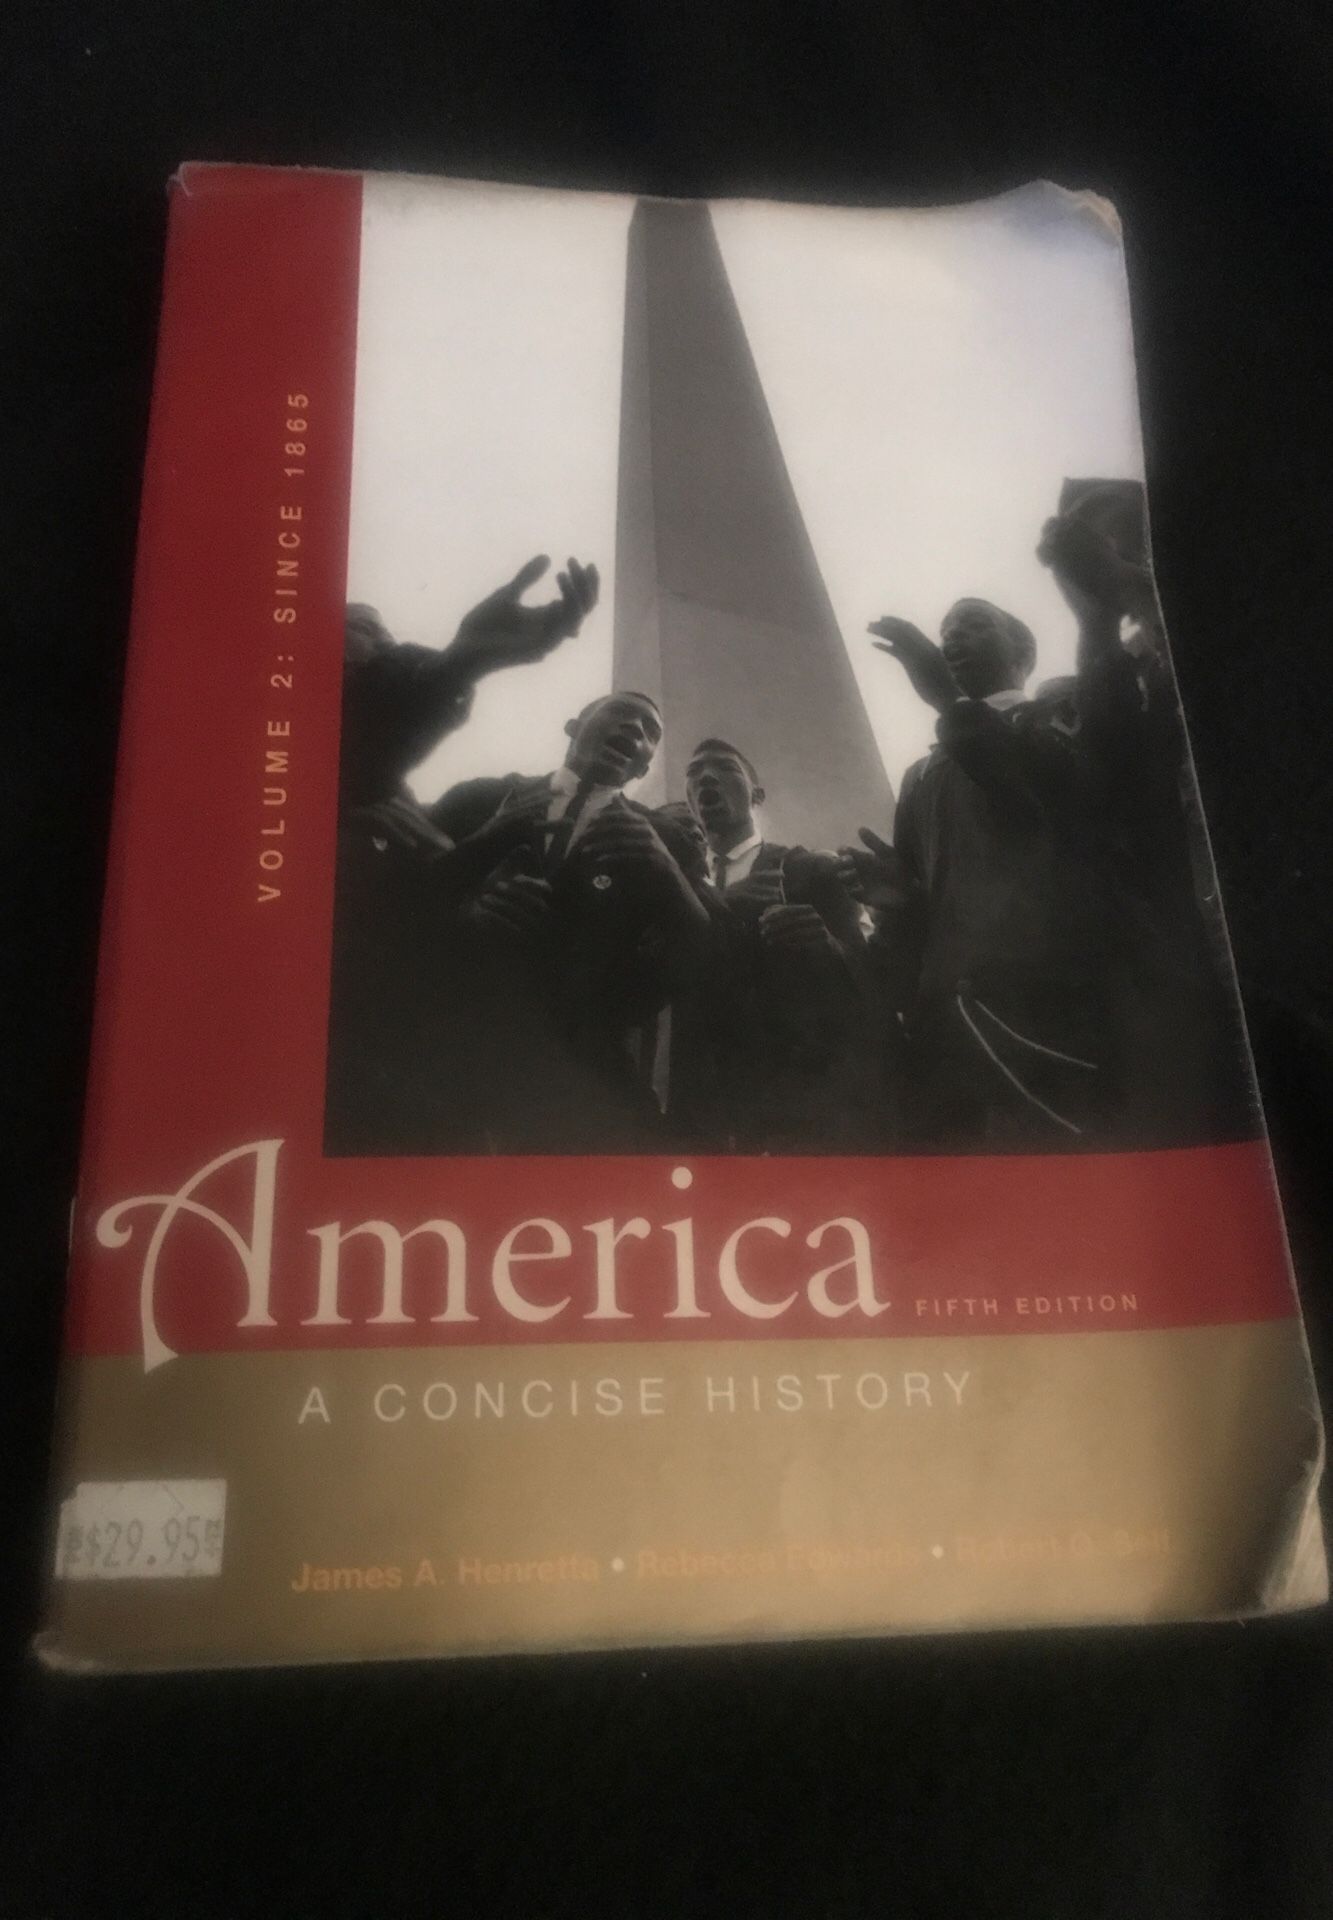 America fifth edition a concise history